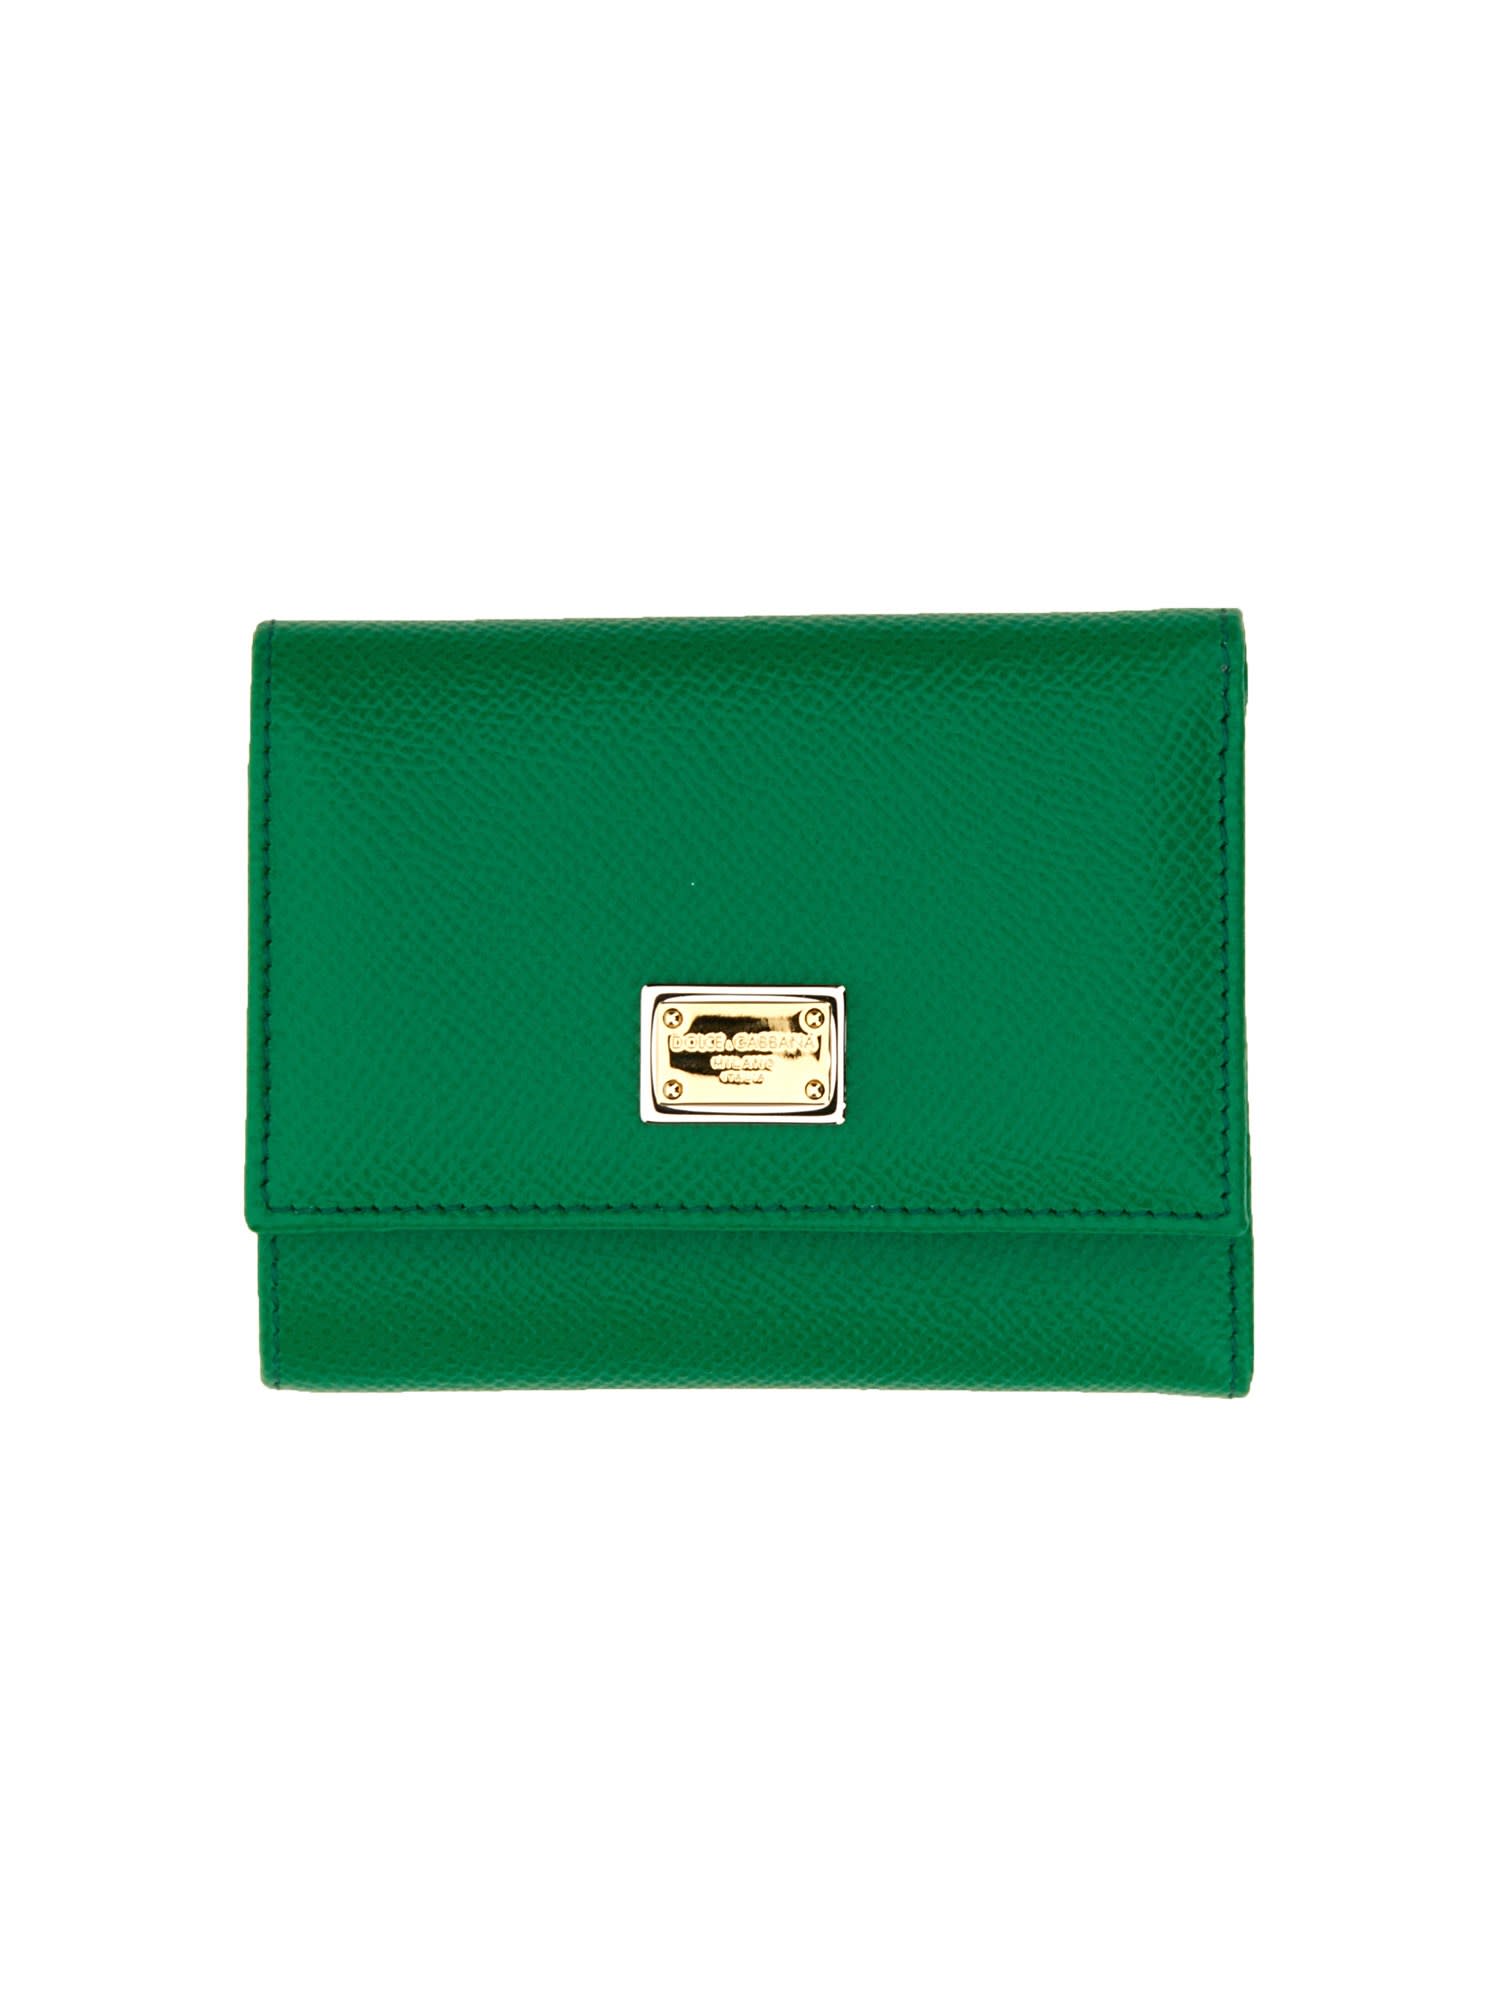 Dolce & Gabbana Small Leather Wallet